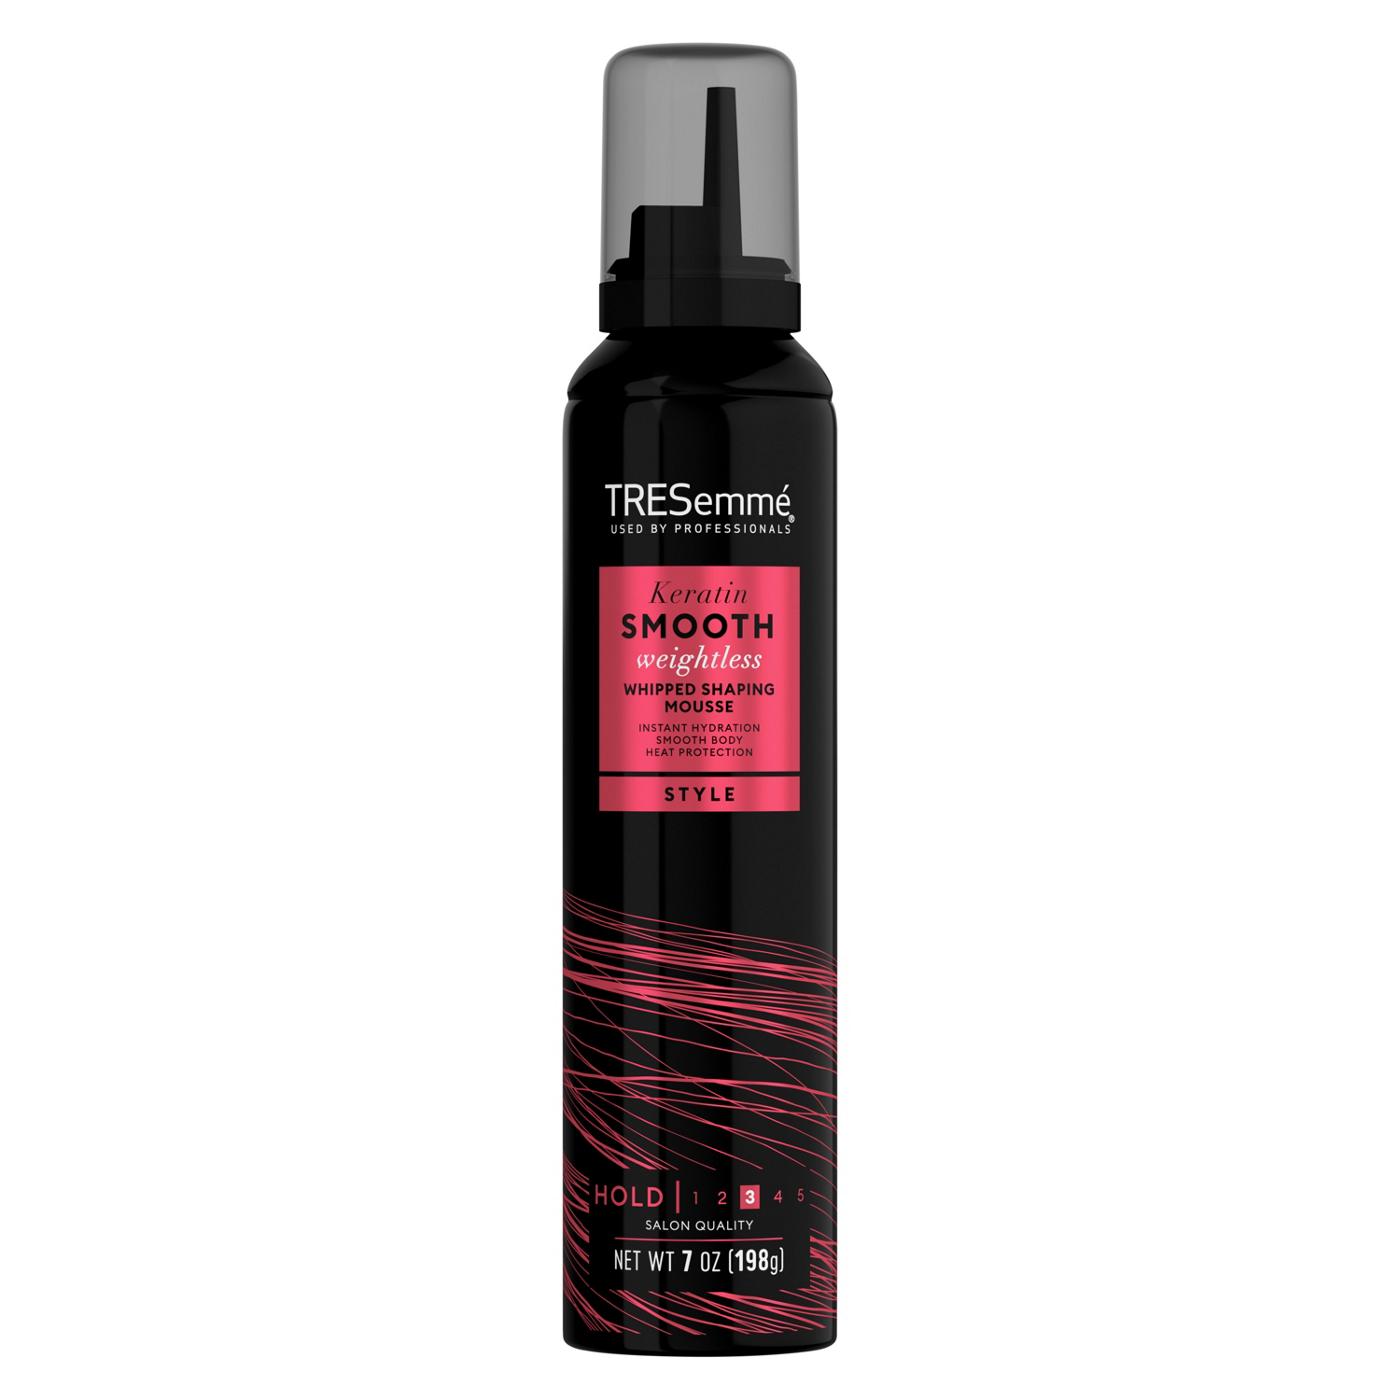 TRESemmé Get 3 days of weightlessly smooth hair with the TRESemmé Keratin Smooth Whipped Shaping Mousse. Say hey to all-day lift, smooth body, and high shine for all your sleekest, most voluminous styles. This salon-quality whipped shaping mousse provides you with lasting hold, instant hydration, and major volume so you can reach all of your hair goals. Give your hair an immediate boost of moisture and frizz-defeating smoothness without ever feeling greasy or heavy. You'll love the way your hair looks and feels! Perfect your Smooth Blowout in 3 easy steps. Prep strands with Keratin Smooth Shampoo and Conditioner, then style with Keratin Smooth Mousse. Start by shaking the can and dispensing 2 to 3 dollops of mousse into the palms of your hands. Spread the mousse evenly into damp hair, from roots to tips, before blow drying and styling your hair. Finish your smooth, sleek look with our Keratin Smooth Anti-Frizz Finishing Spray. Since 1948, TRESemmé has been dedicated to providing professional-quality results to empower YOU to express your style. Our unique formulas are PETA-approved and made with carefully selected ingredients, and TRESemmé never tests on animals. We're always made with intention and inspired by the latest trends and style.; image 1 of 4